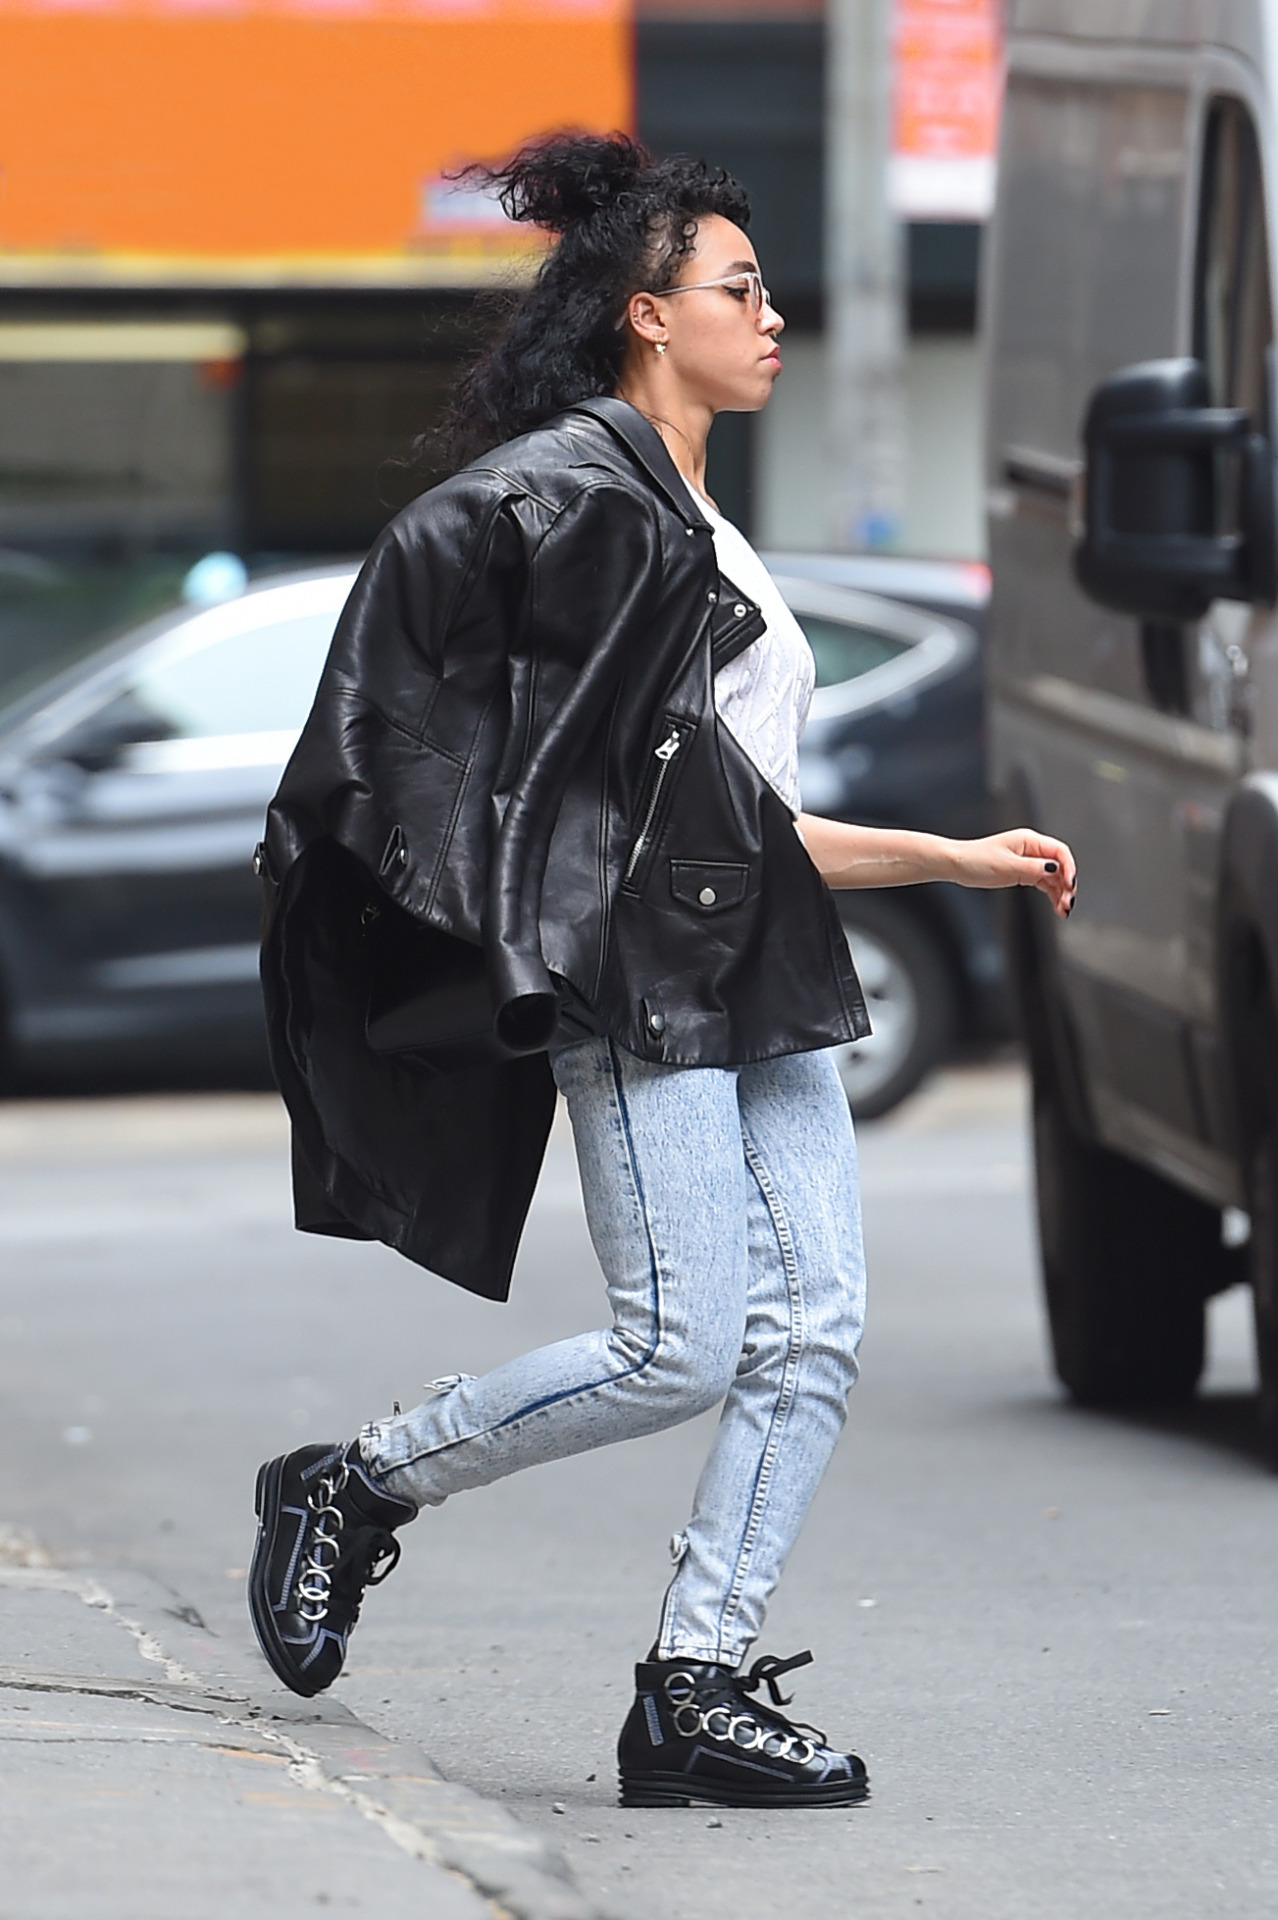 celebritiesofcolor:

FKA Twigs out and about in NYC.